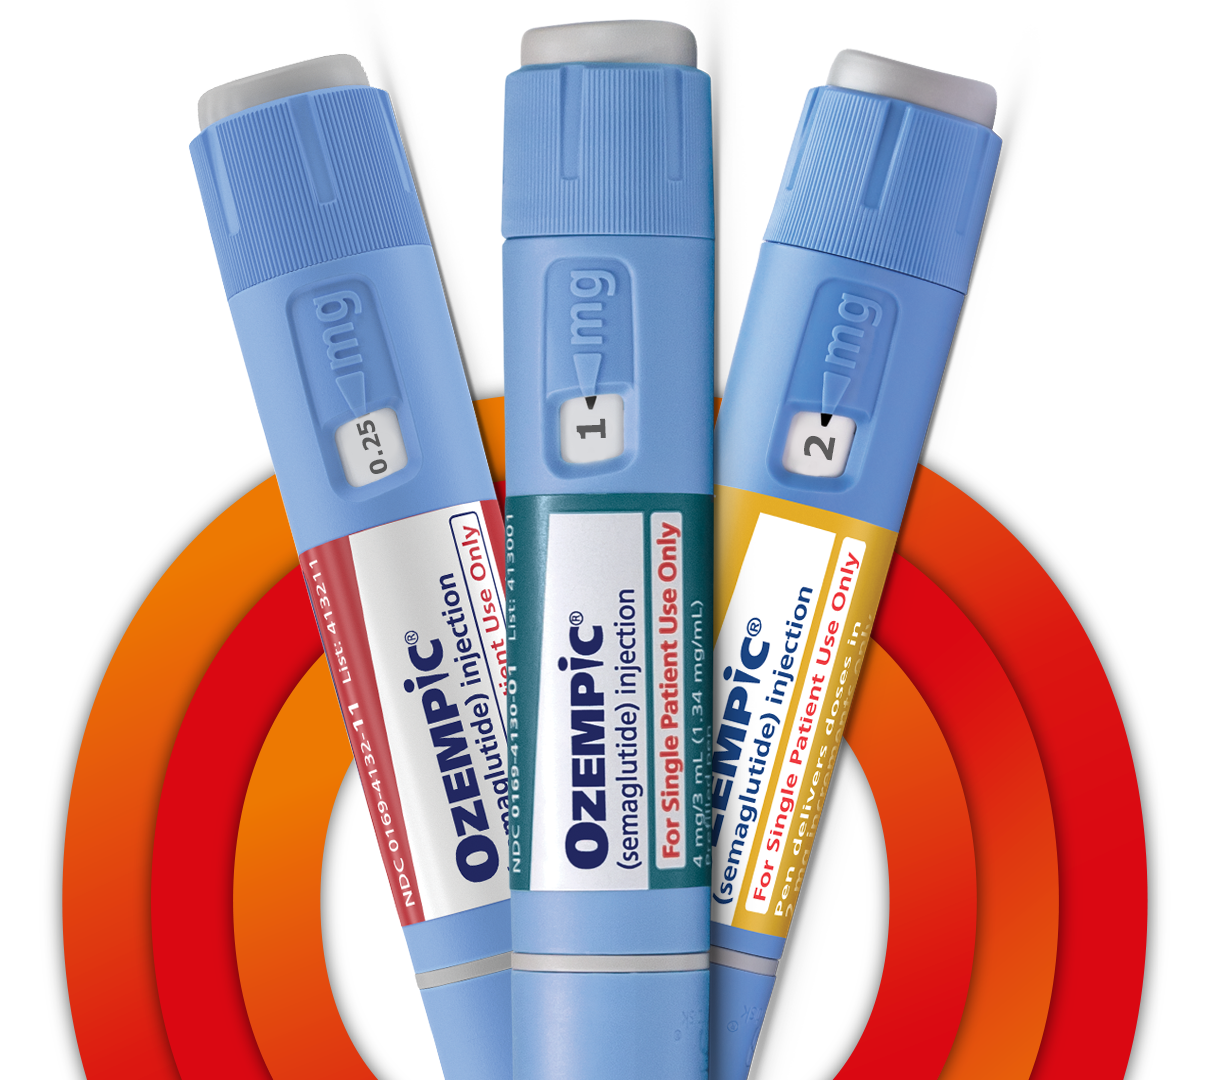 Red, blue, and yellow label Ozempic® (semaglutide) injection Pens with an orange circle in background